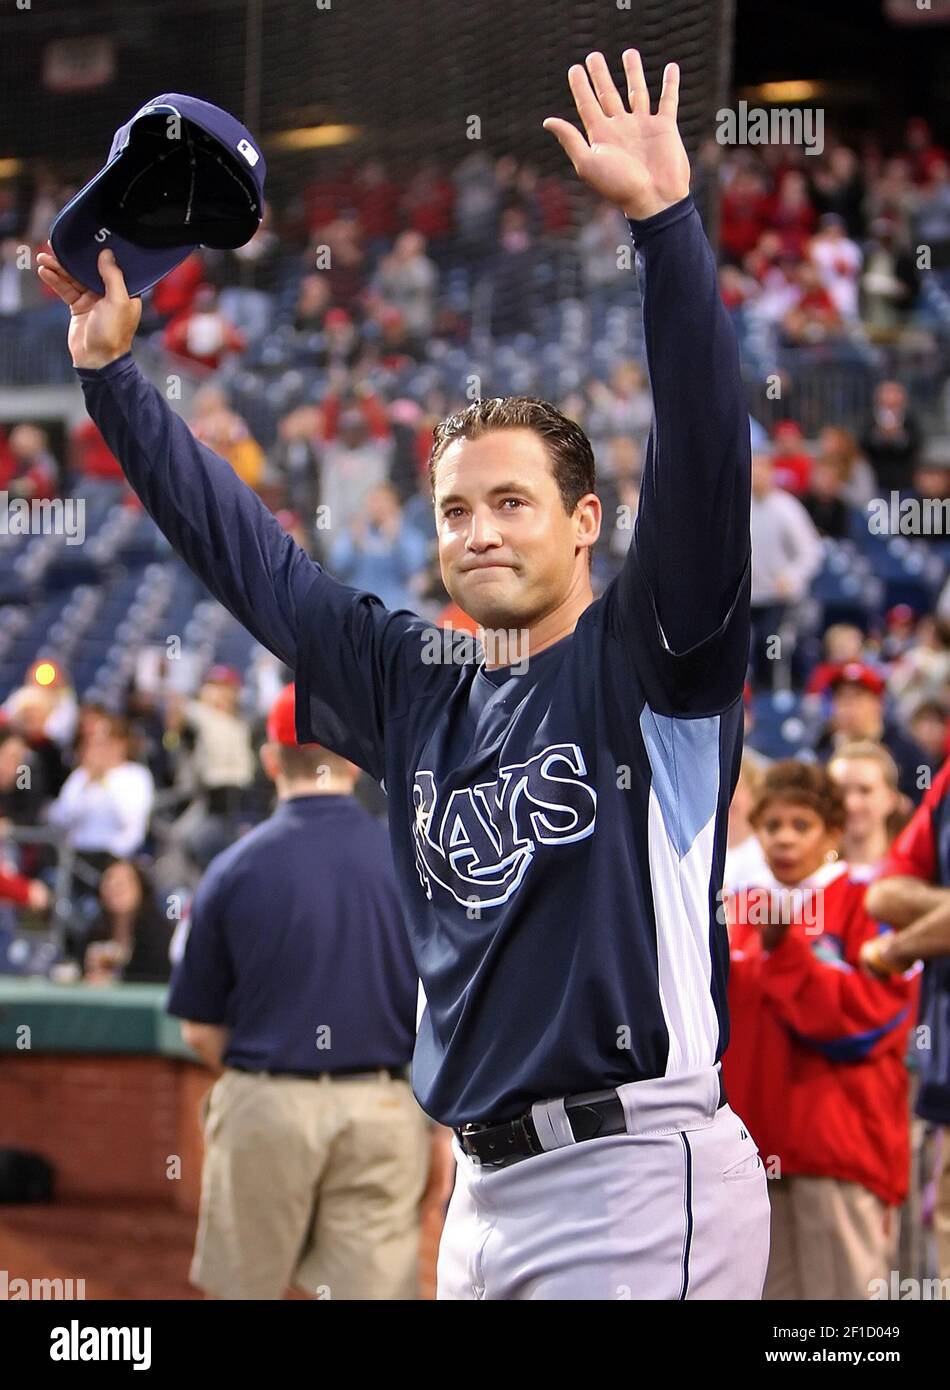 Tampa Bay Rays left fielder Pat Burrell waves to the fans after a special  video presentation on the big screen to honor him as a former Phillies'  player before the Rays' preseason